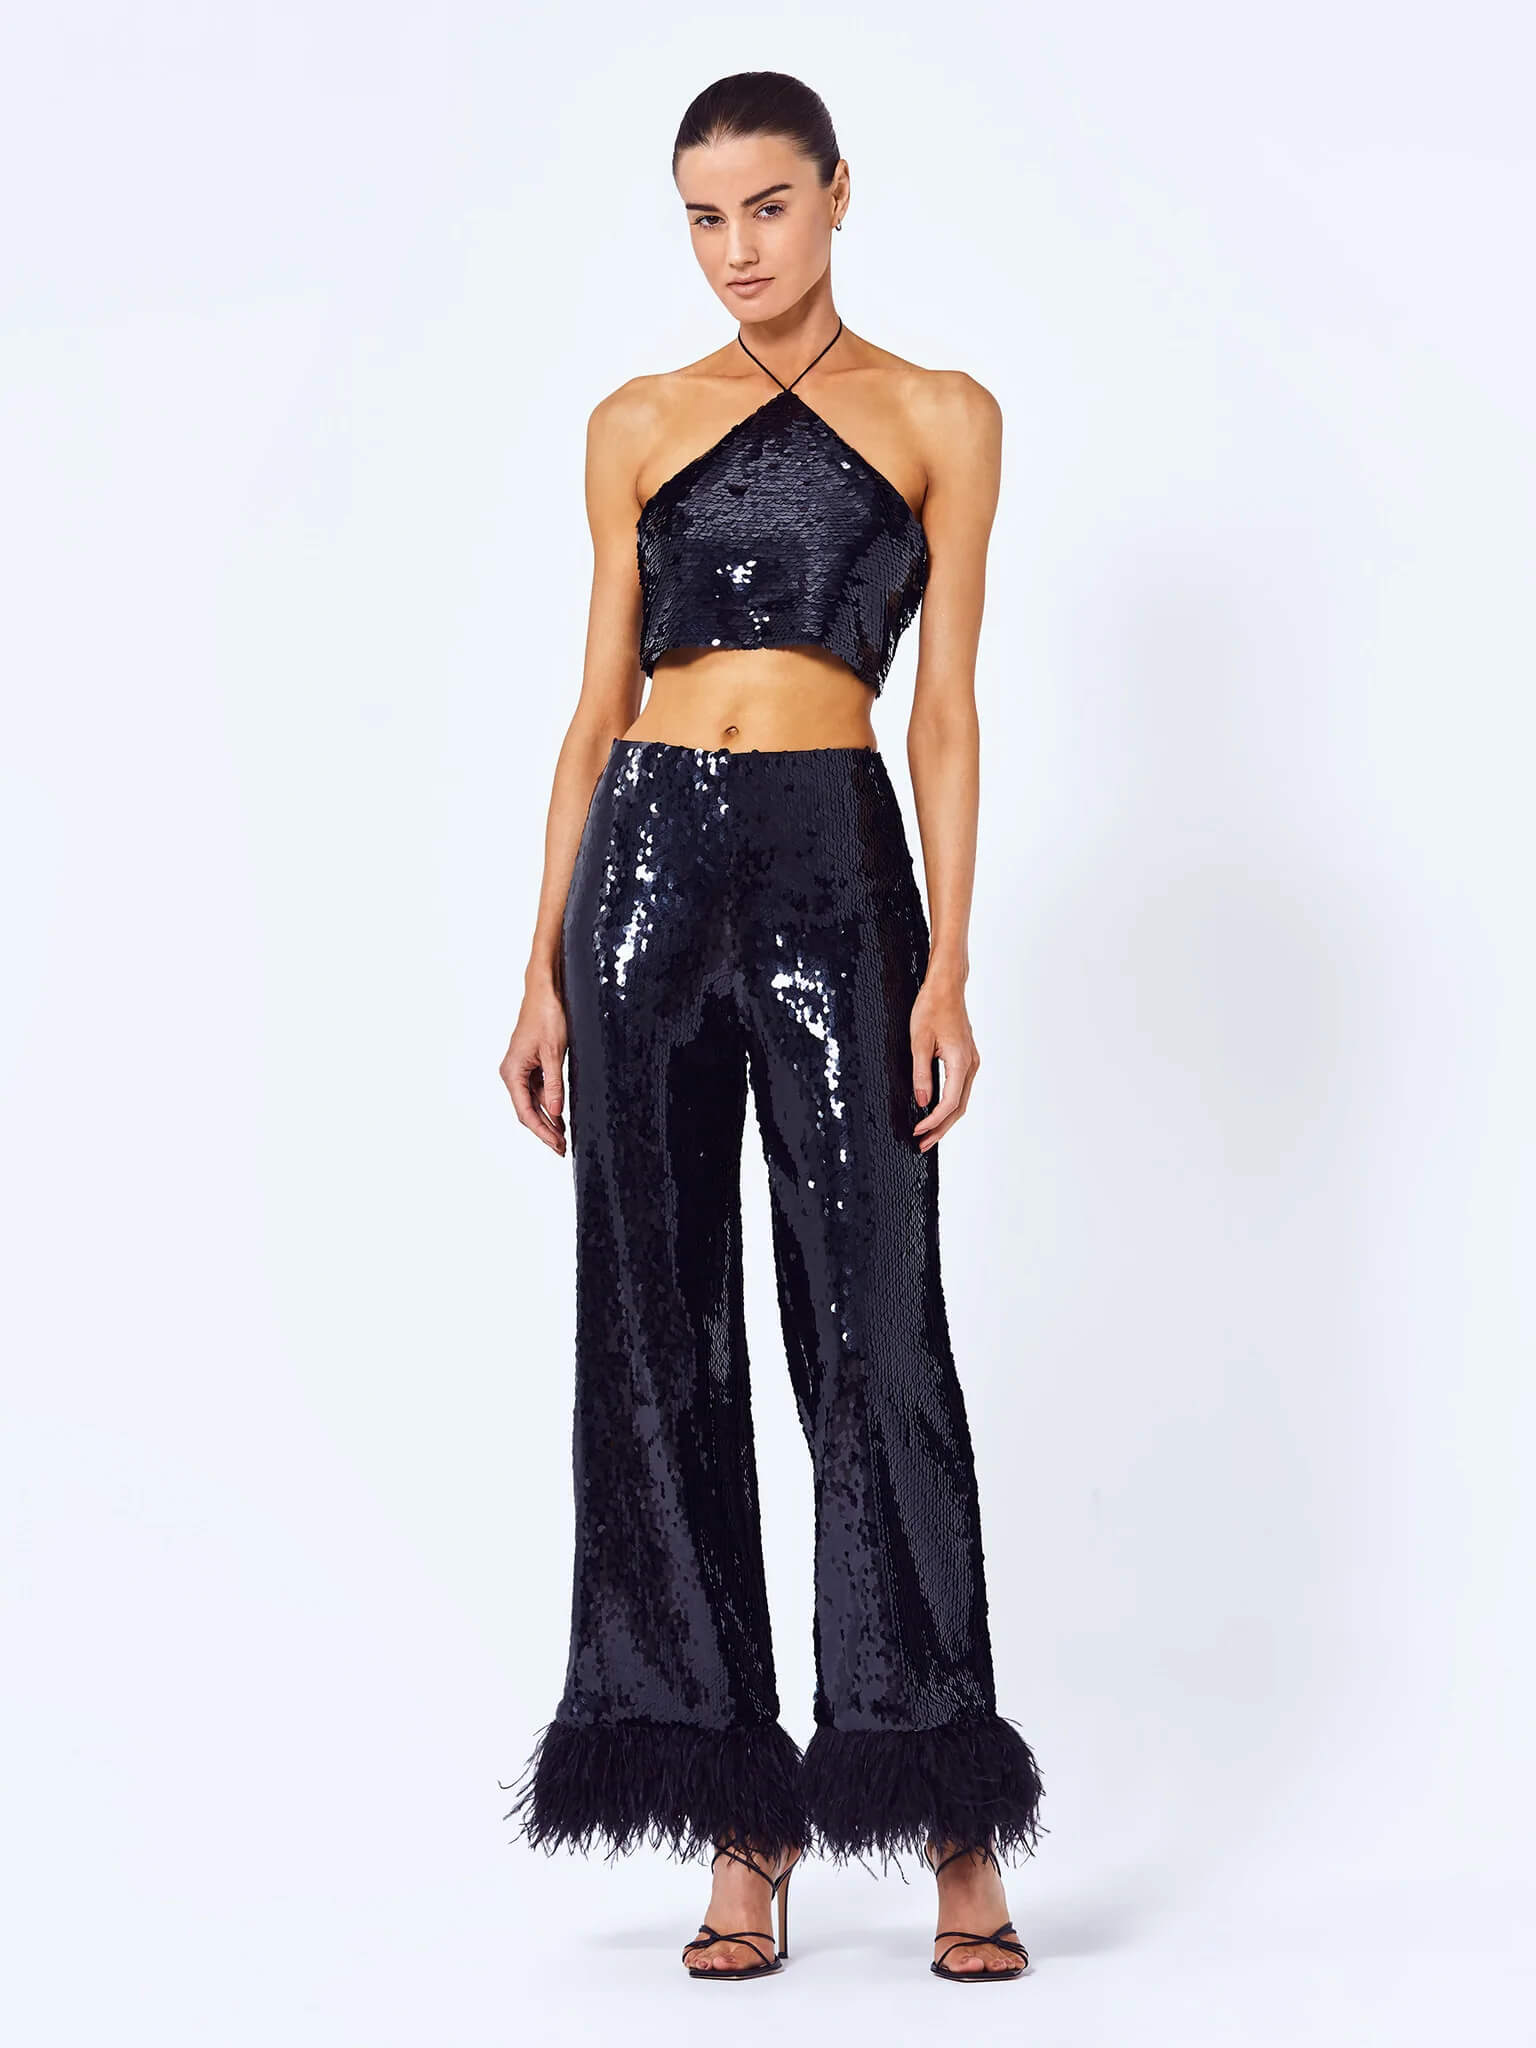 Alexis Hana Pant in Black available at The New Trend